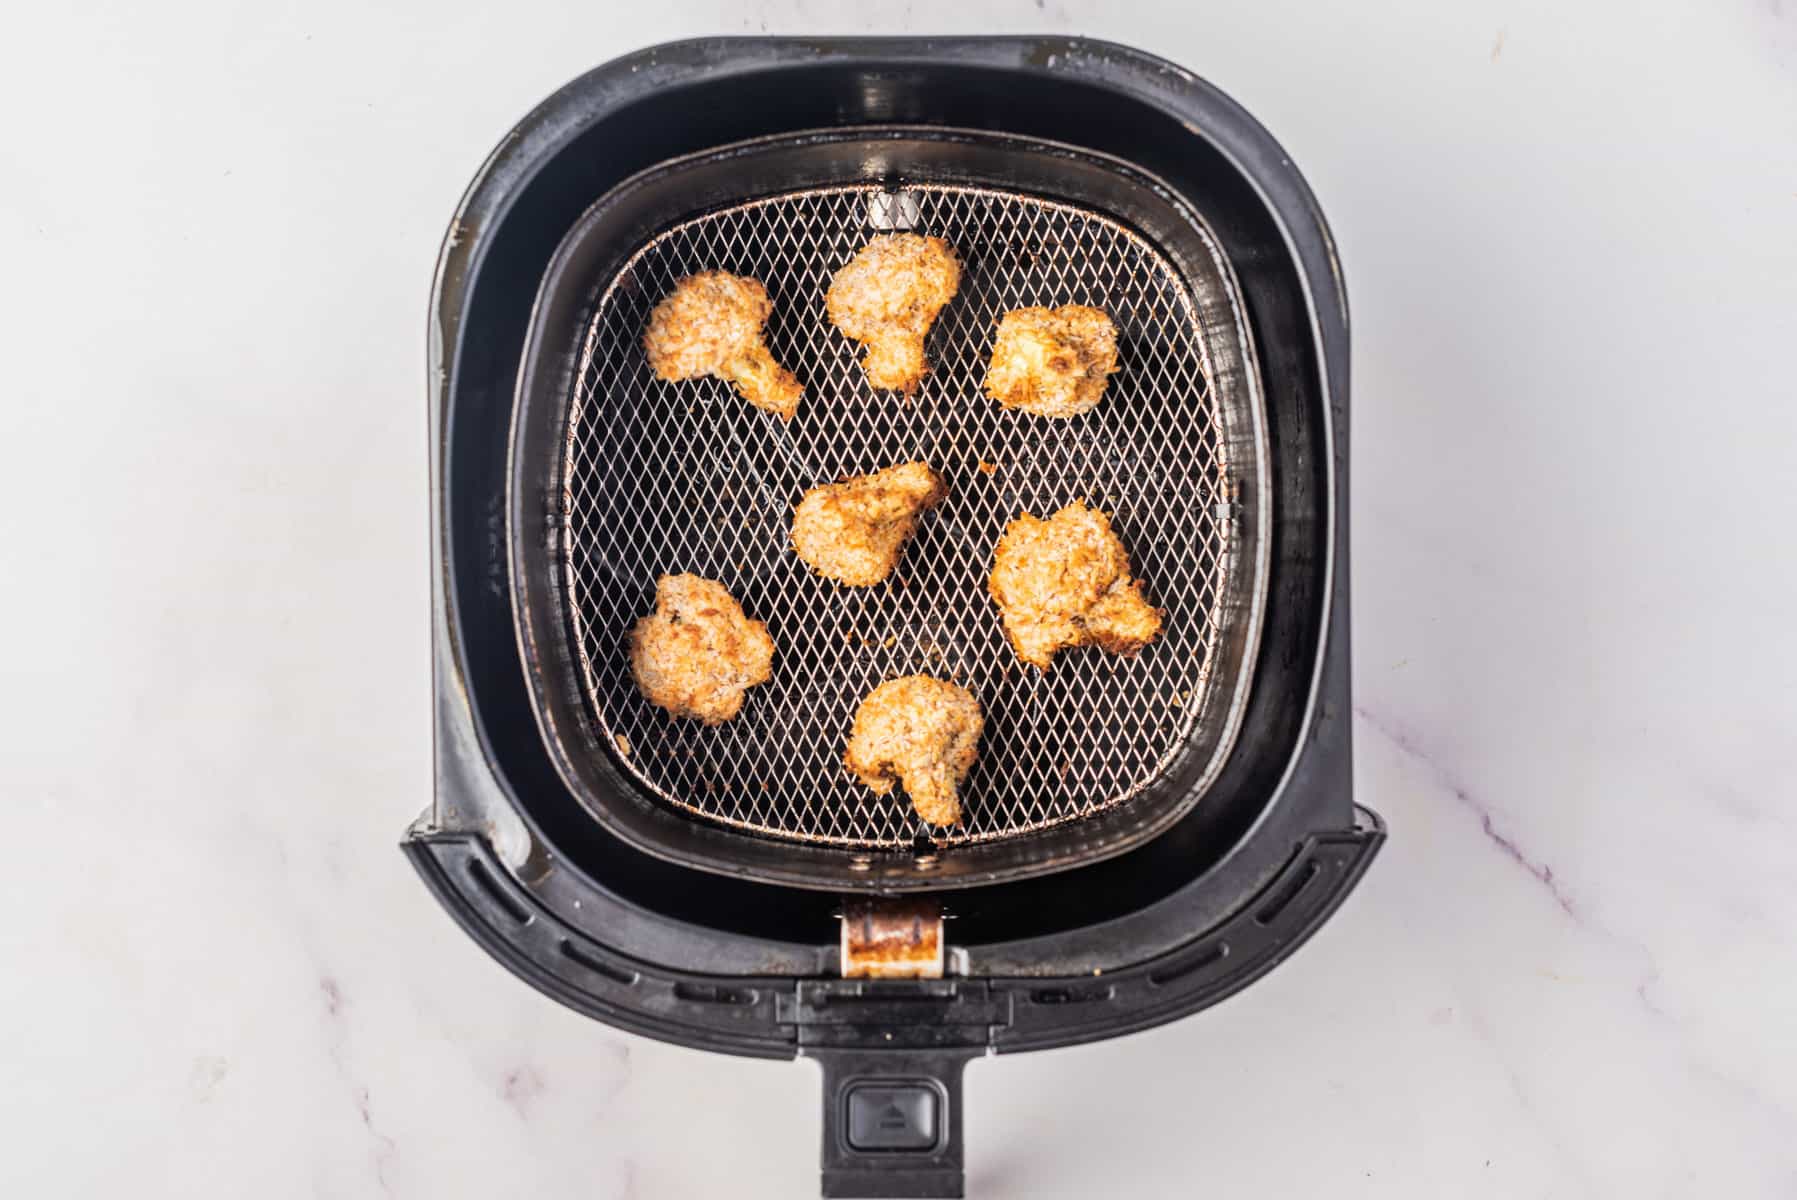 An image of cauliflower florets in an air fryer, half cooked